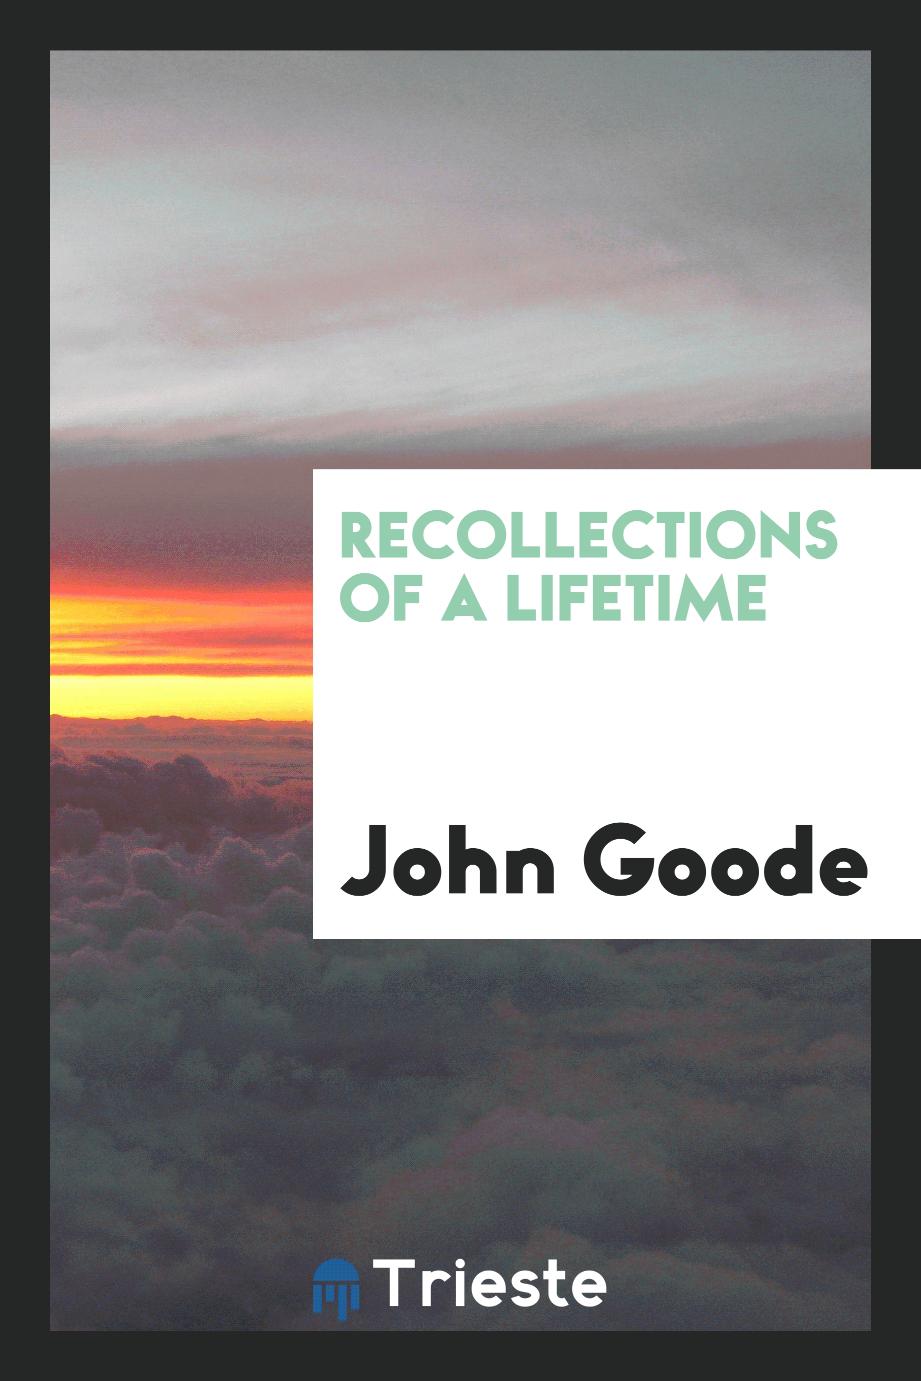 Recollections of a lifetime